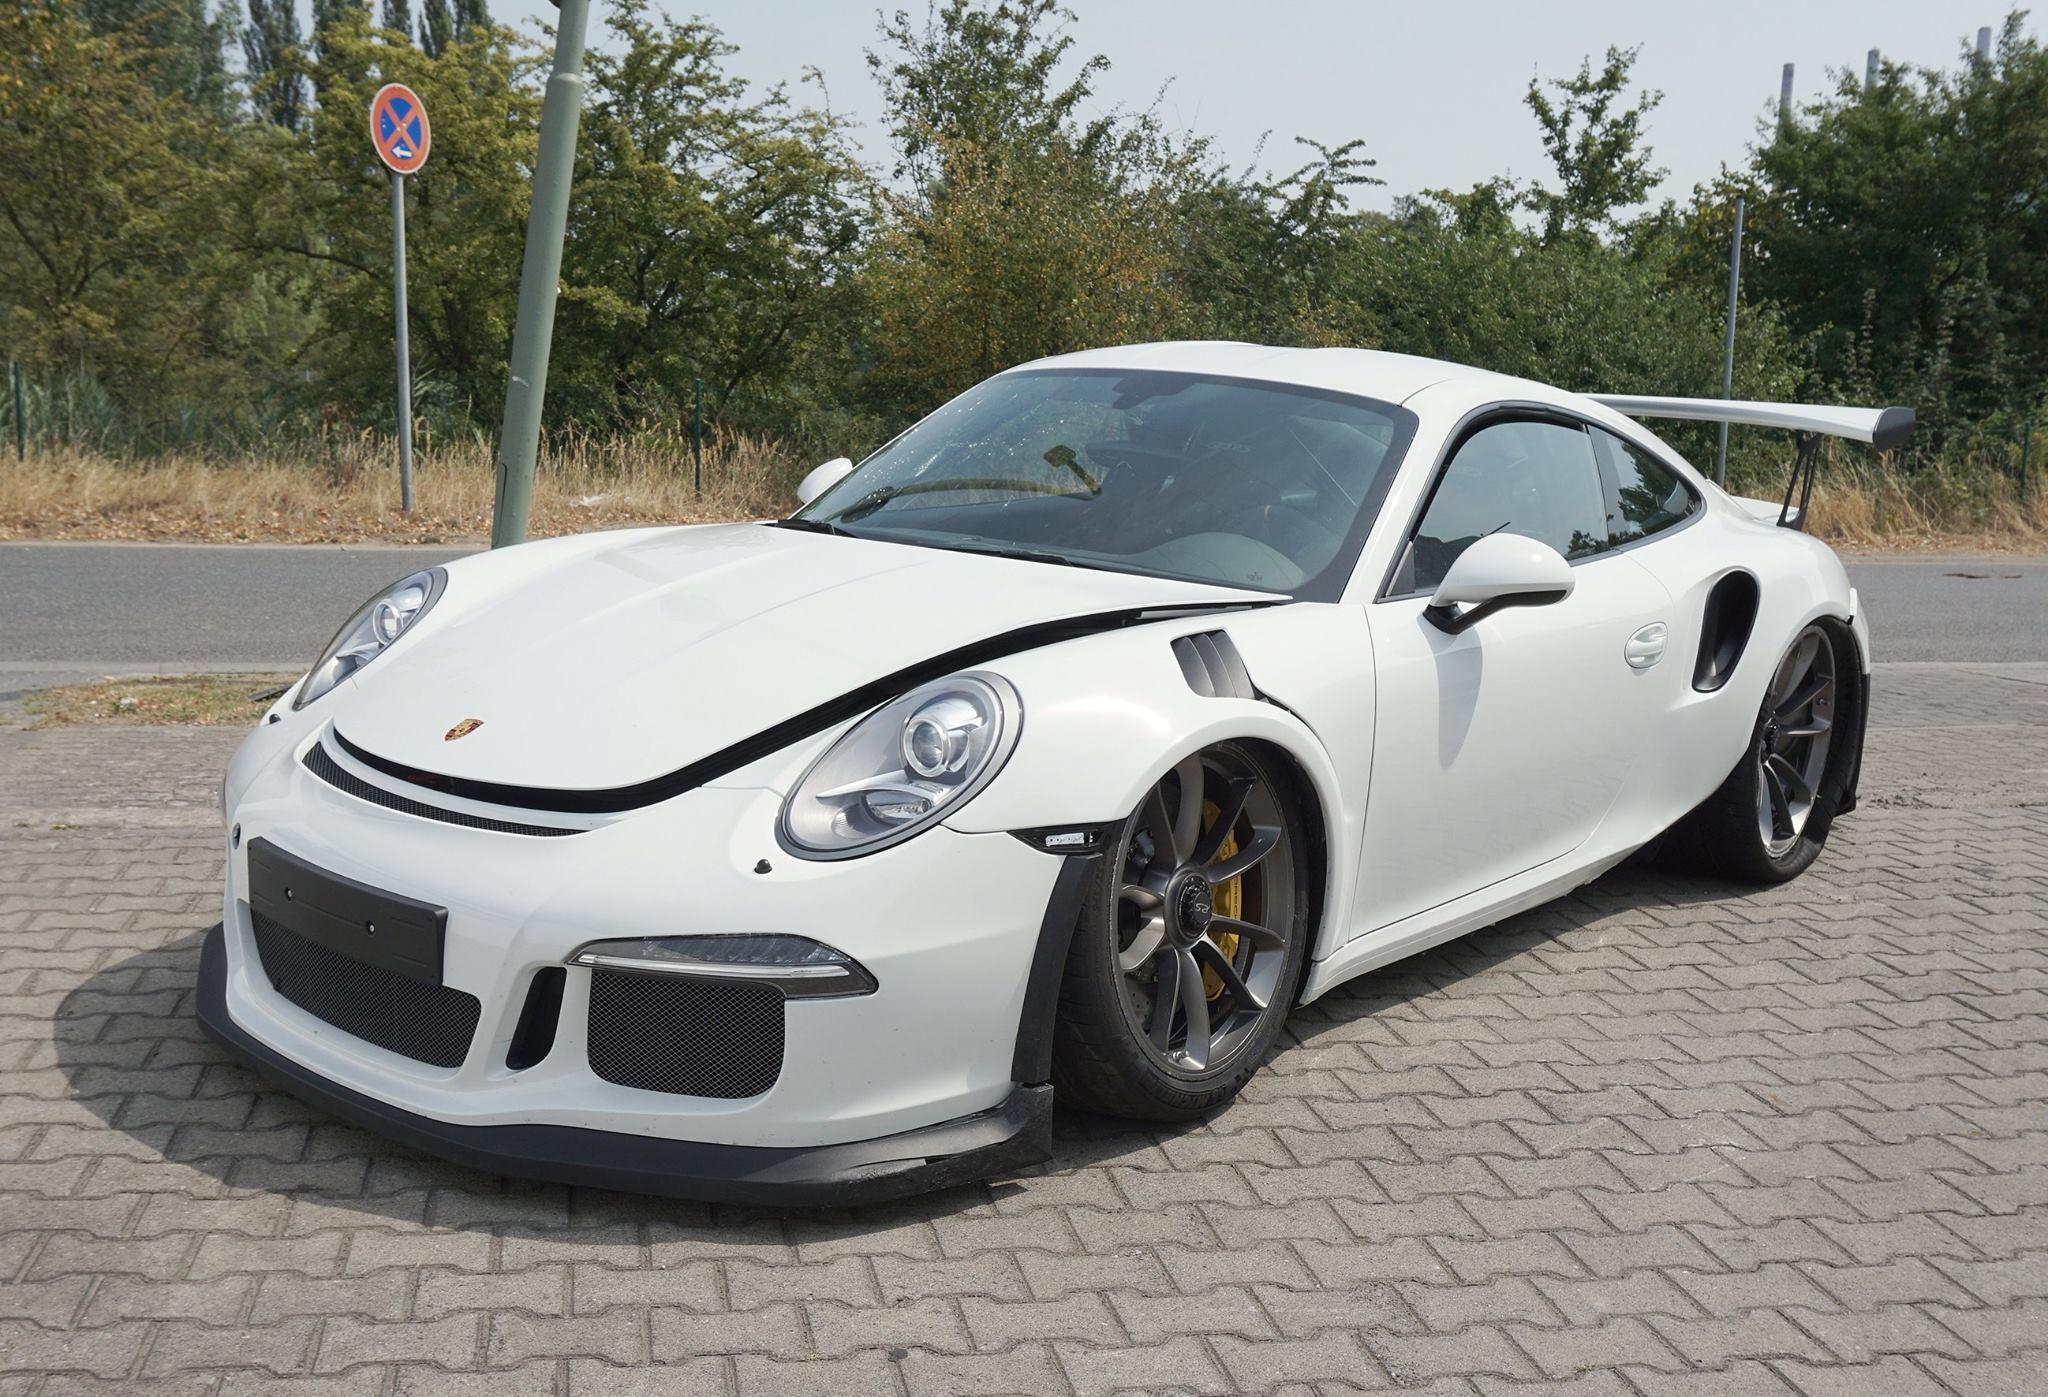 Porsche 911 GT3 RS Crashes in Germany